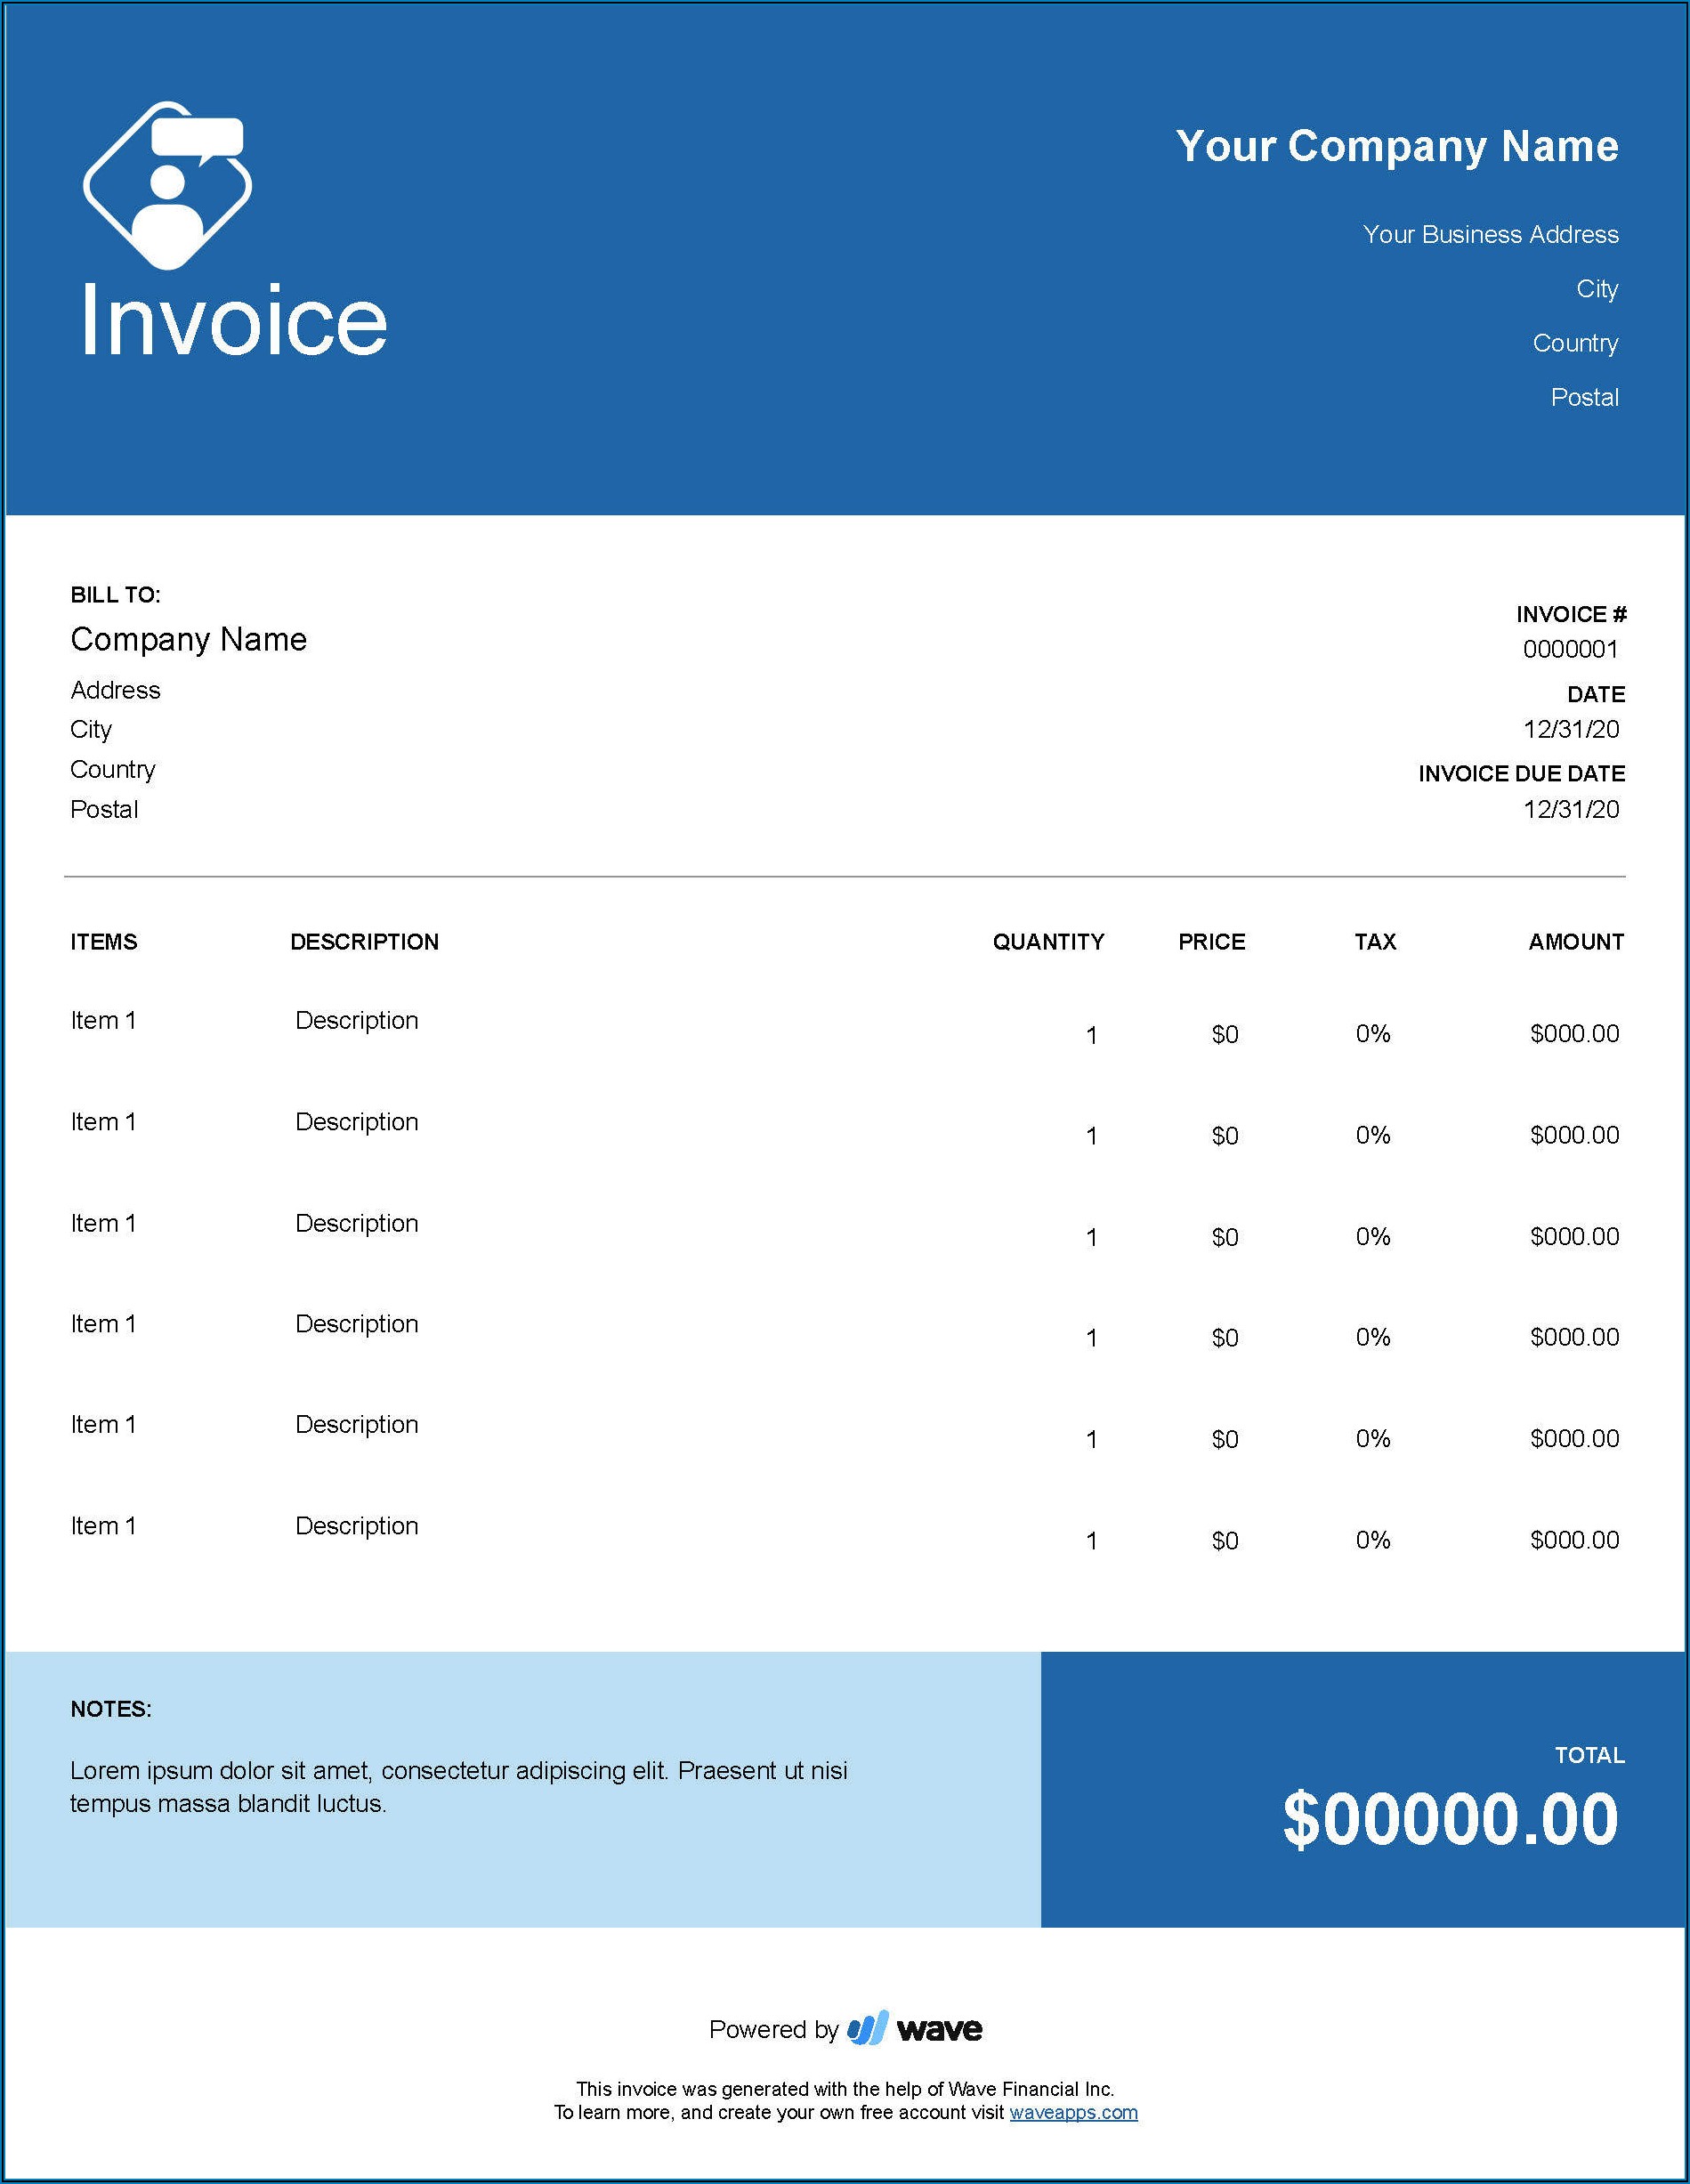 Invoice Sample For Consulting Services